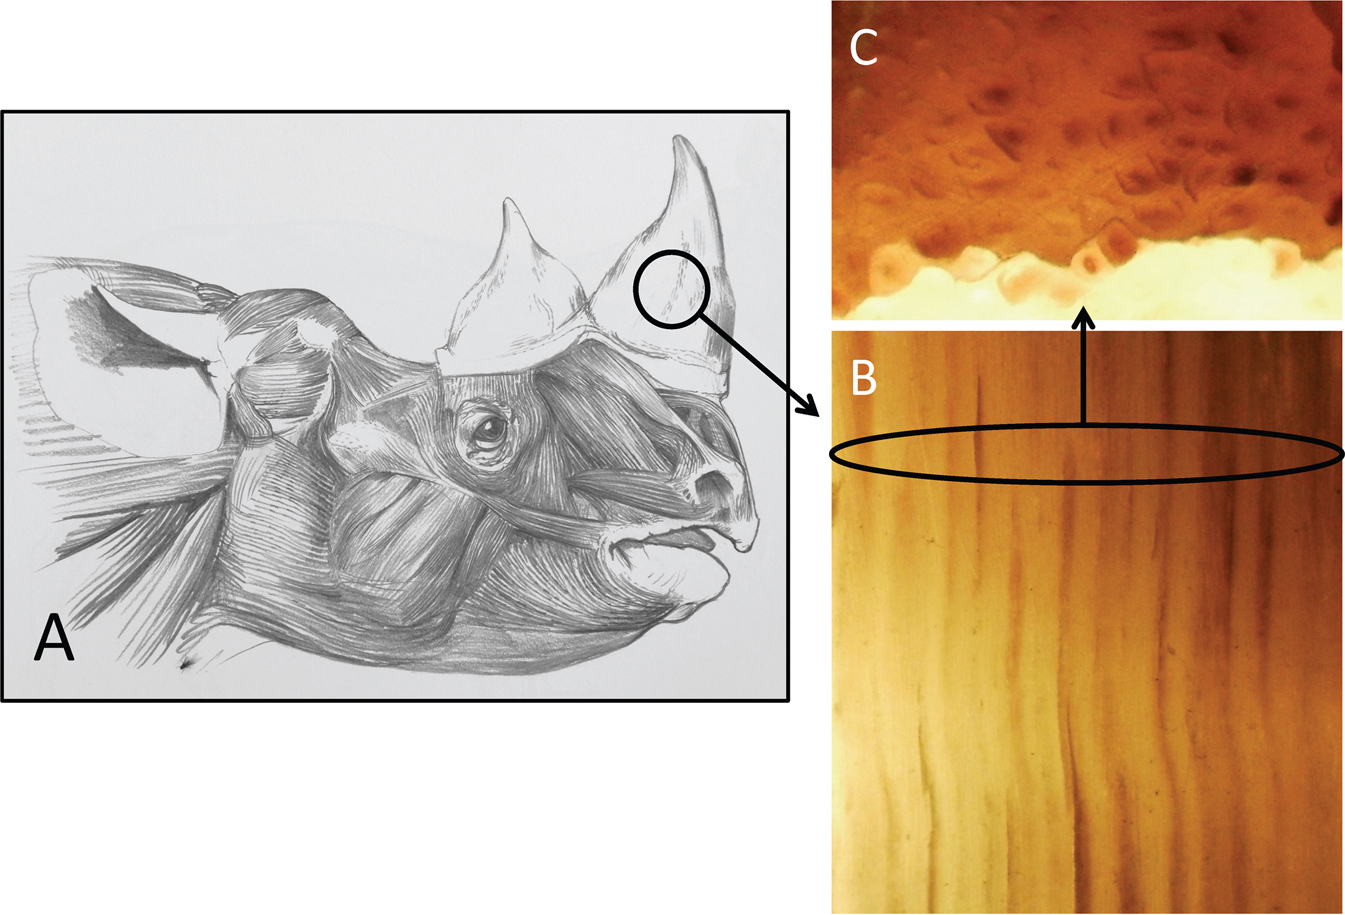 Creating artificial Rhino Horns from Horse Hair | Scientific Reports